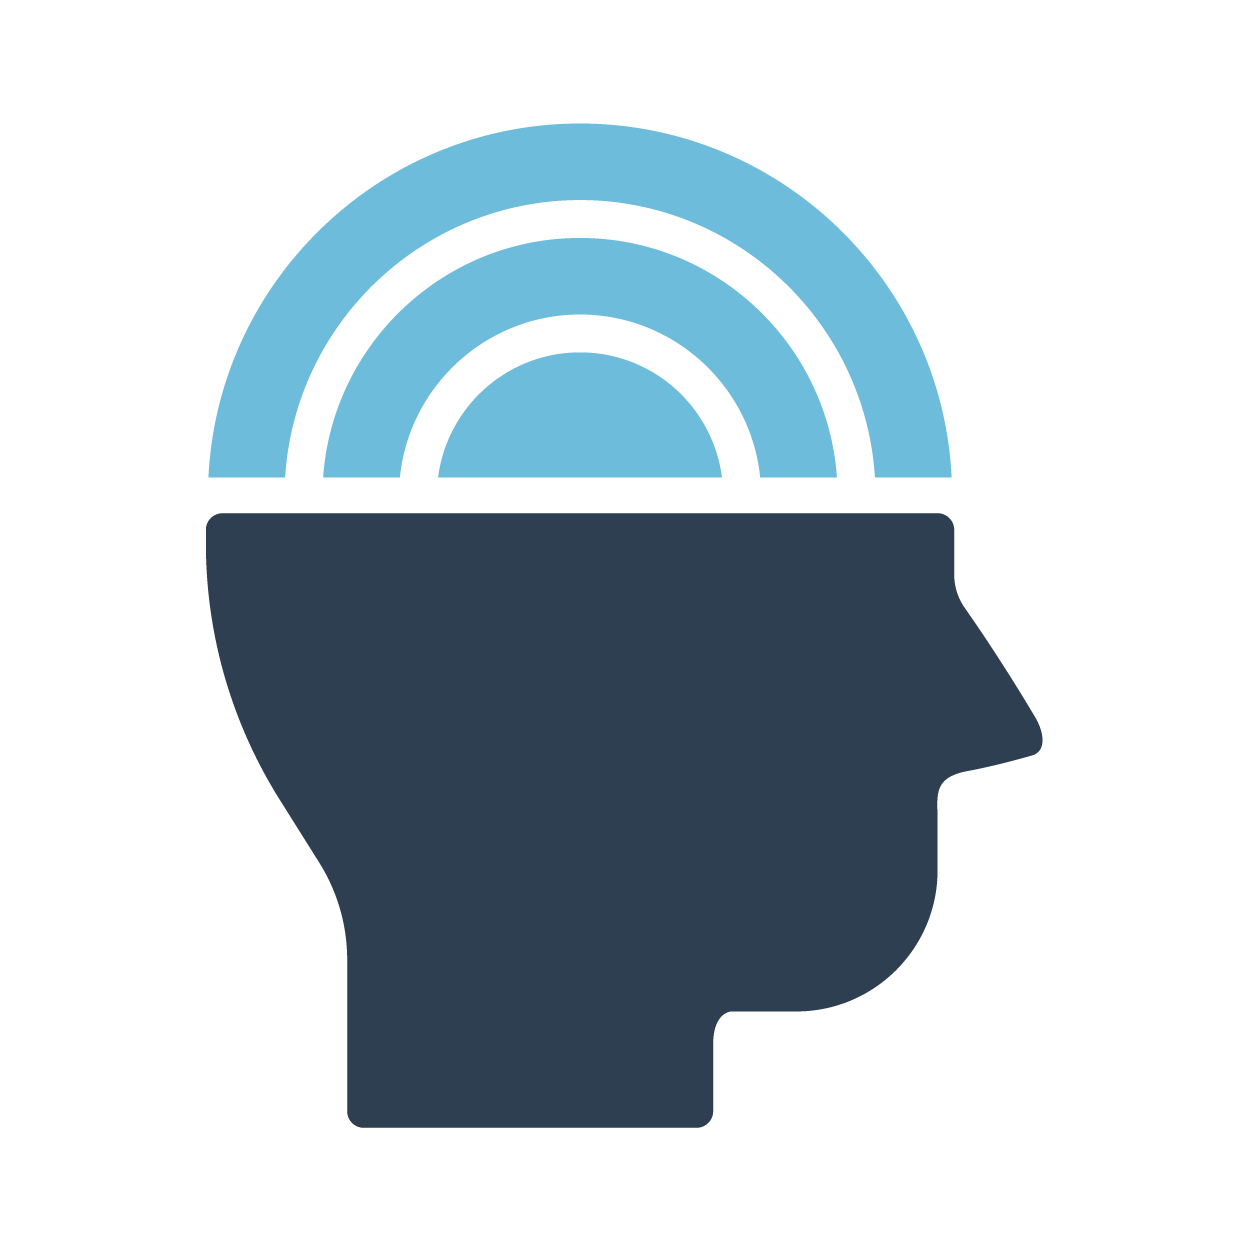 Icon of a dark blue silhouette of a head in profile, but the top half has been replaced by thick light blue arced lines